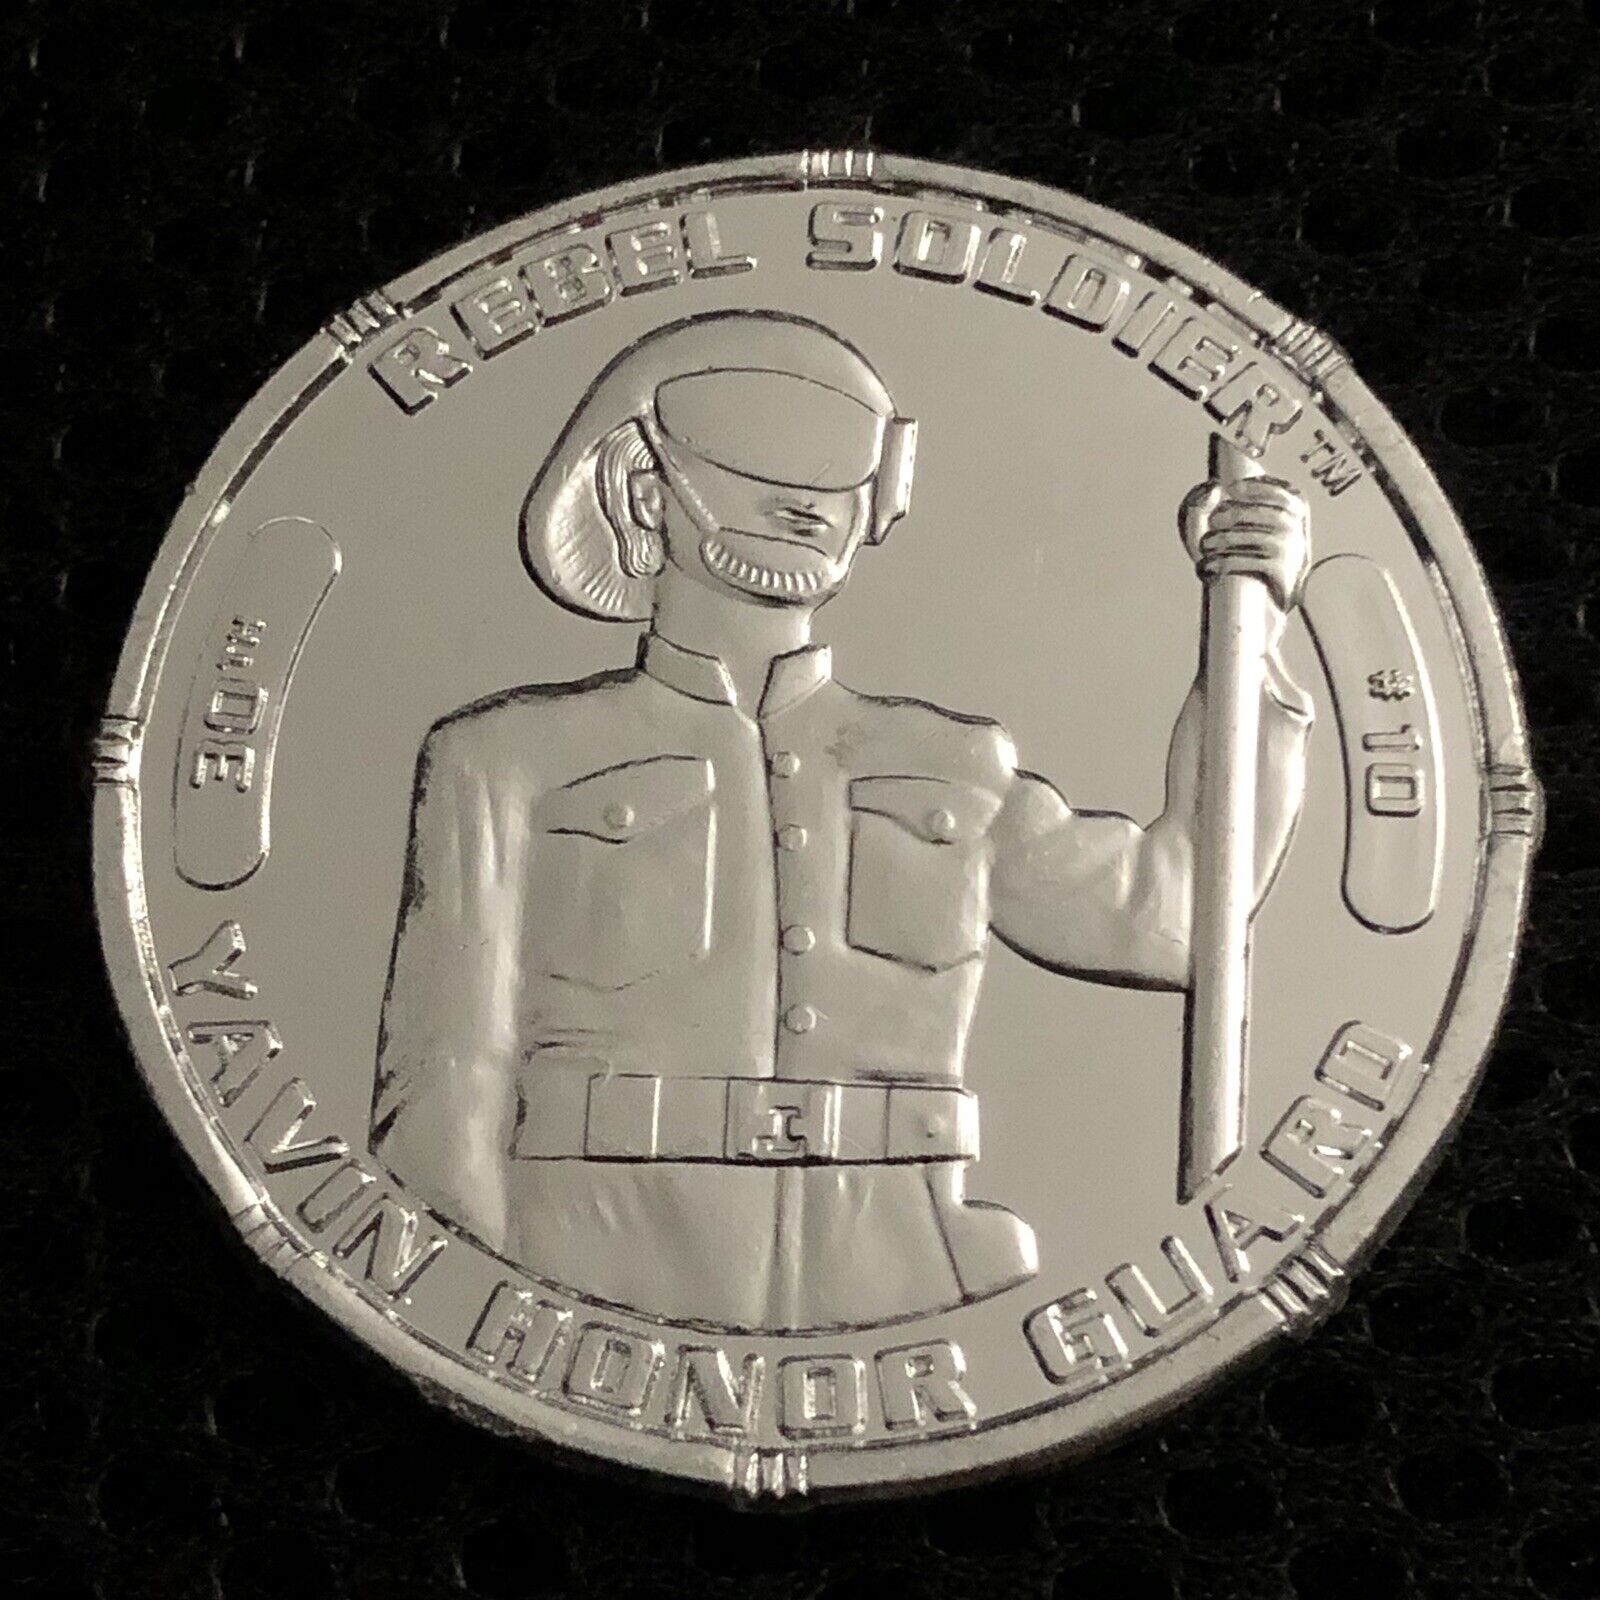 Star Wars Yavin Honor Guard 30th Anniversary COIN #10 A New Hope Rebel Soldier